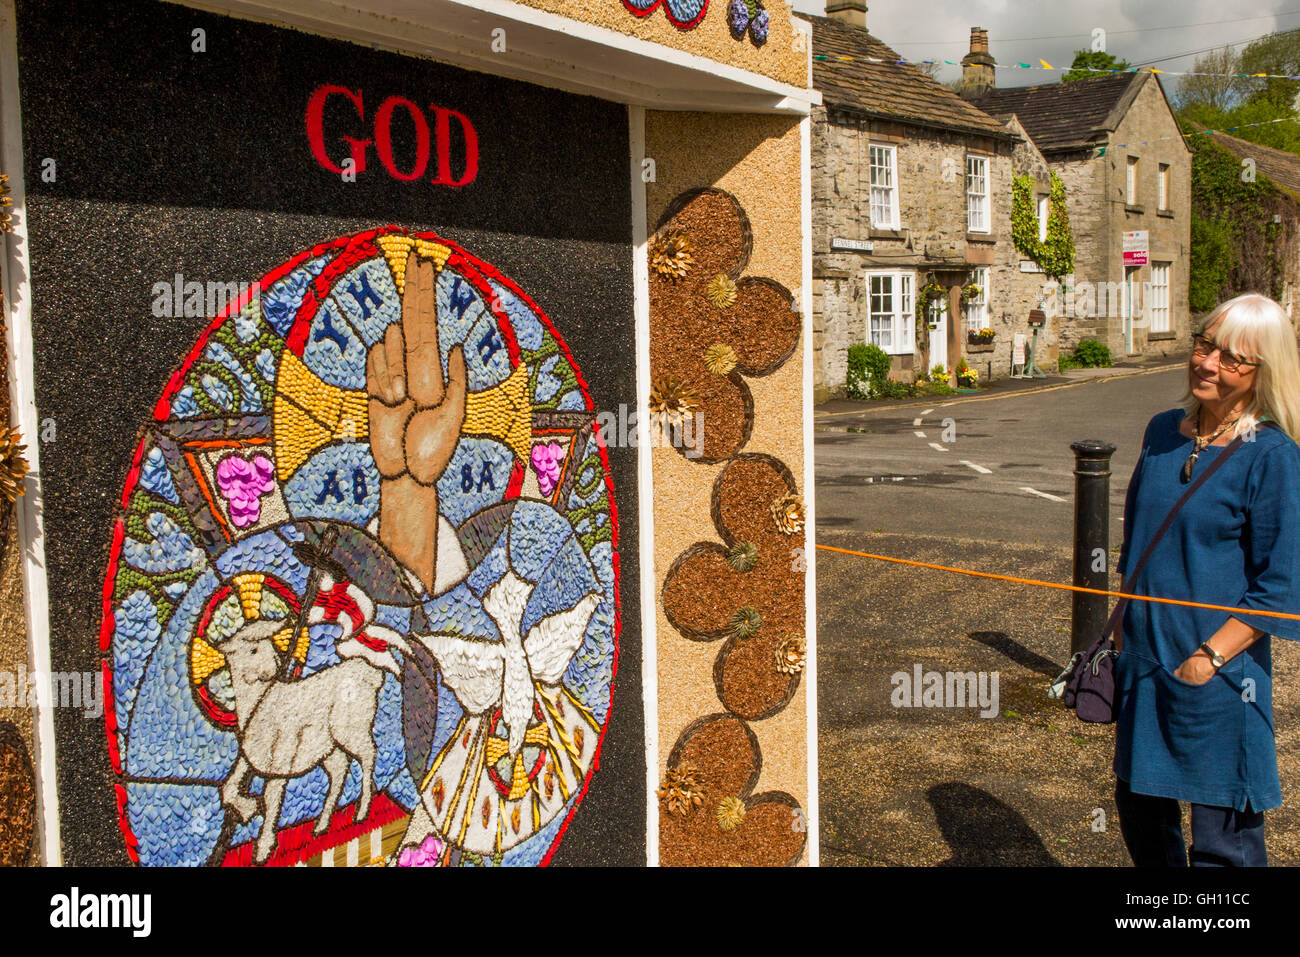 UK, England, Derbyshire, Ashford in the Water, Fennel St, vistor looking at well dressing picture made of petals Stock Photo